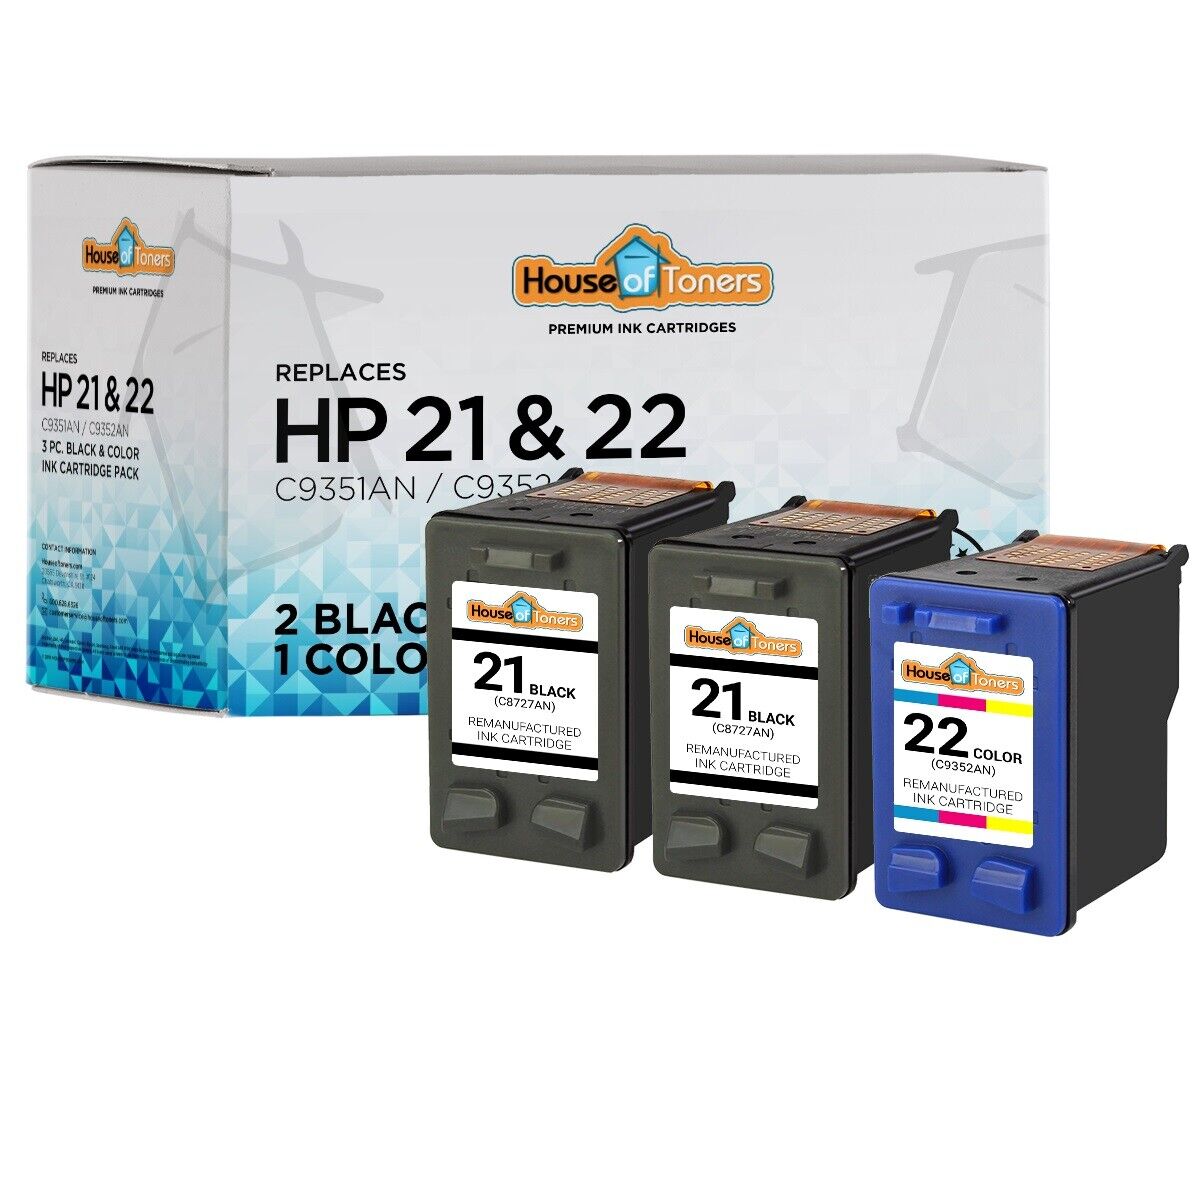 3 PACK for HP 21/22 Ink Cartridge Combo for Officejet J3650 J3680 4315 Printers